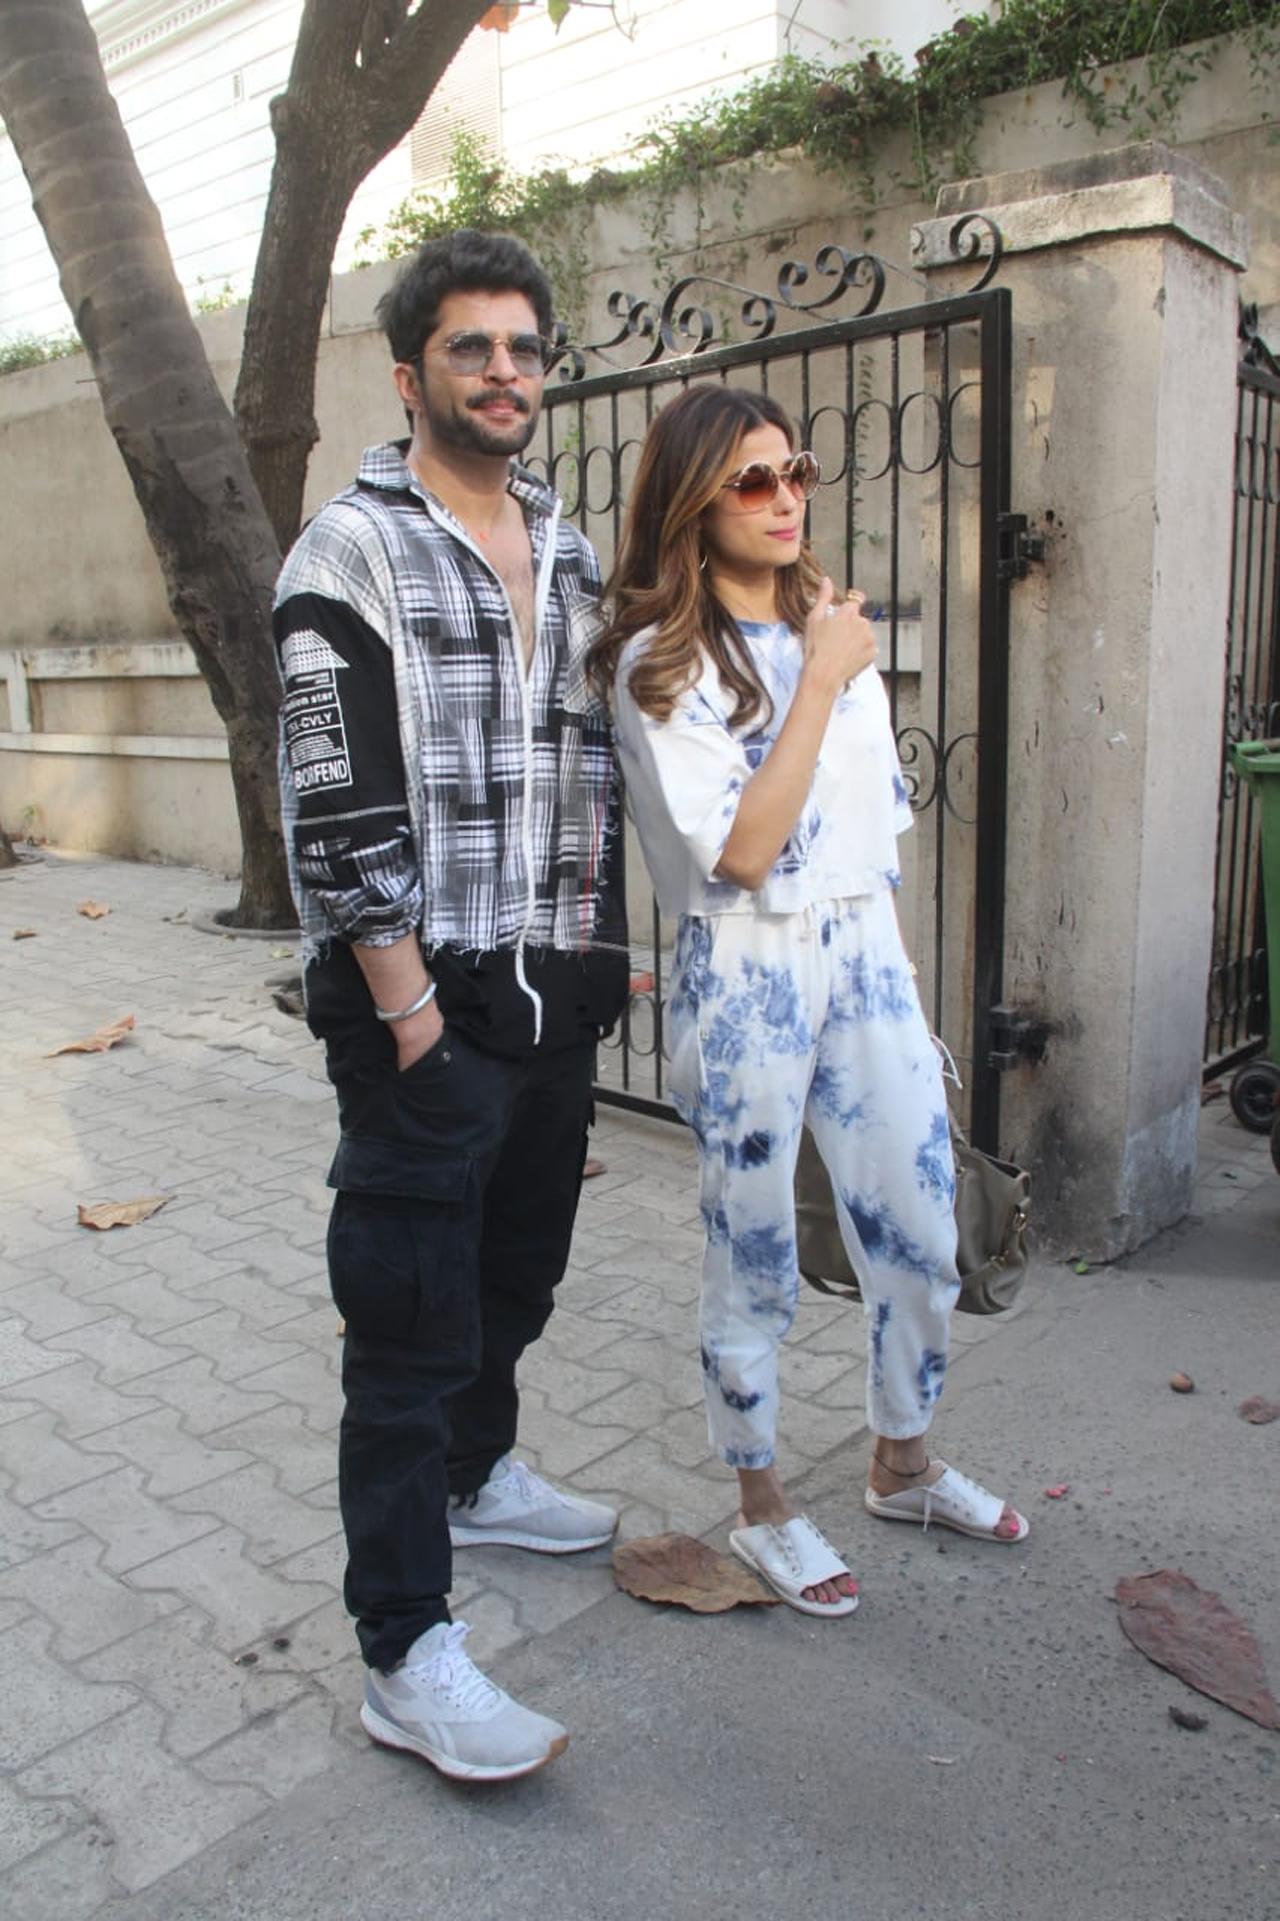 Shamita Shetty and Raqesh Bapat were also snapped together in the city. Shamita was seen wearing a co-ord set, and Raqesh opted for a casual outfit.